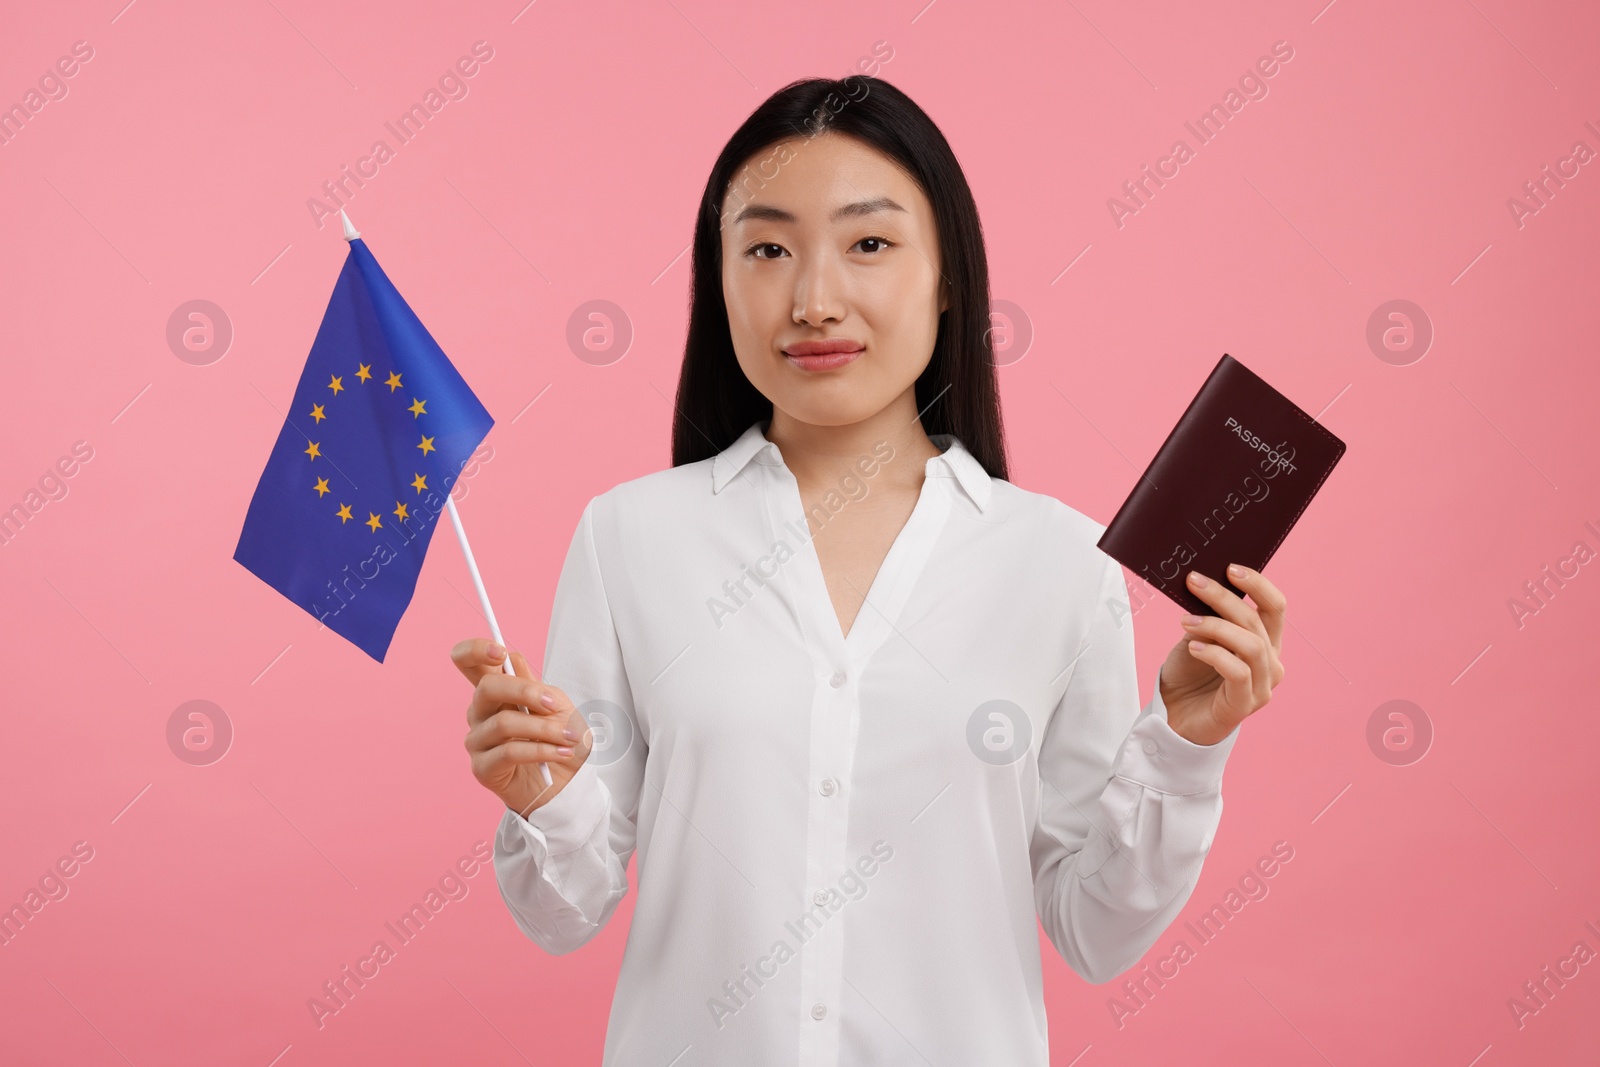 Photo of Immigration to European Union. Woman with passport and flag on pink background